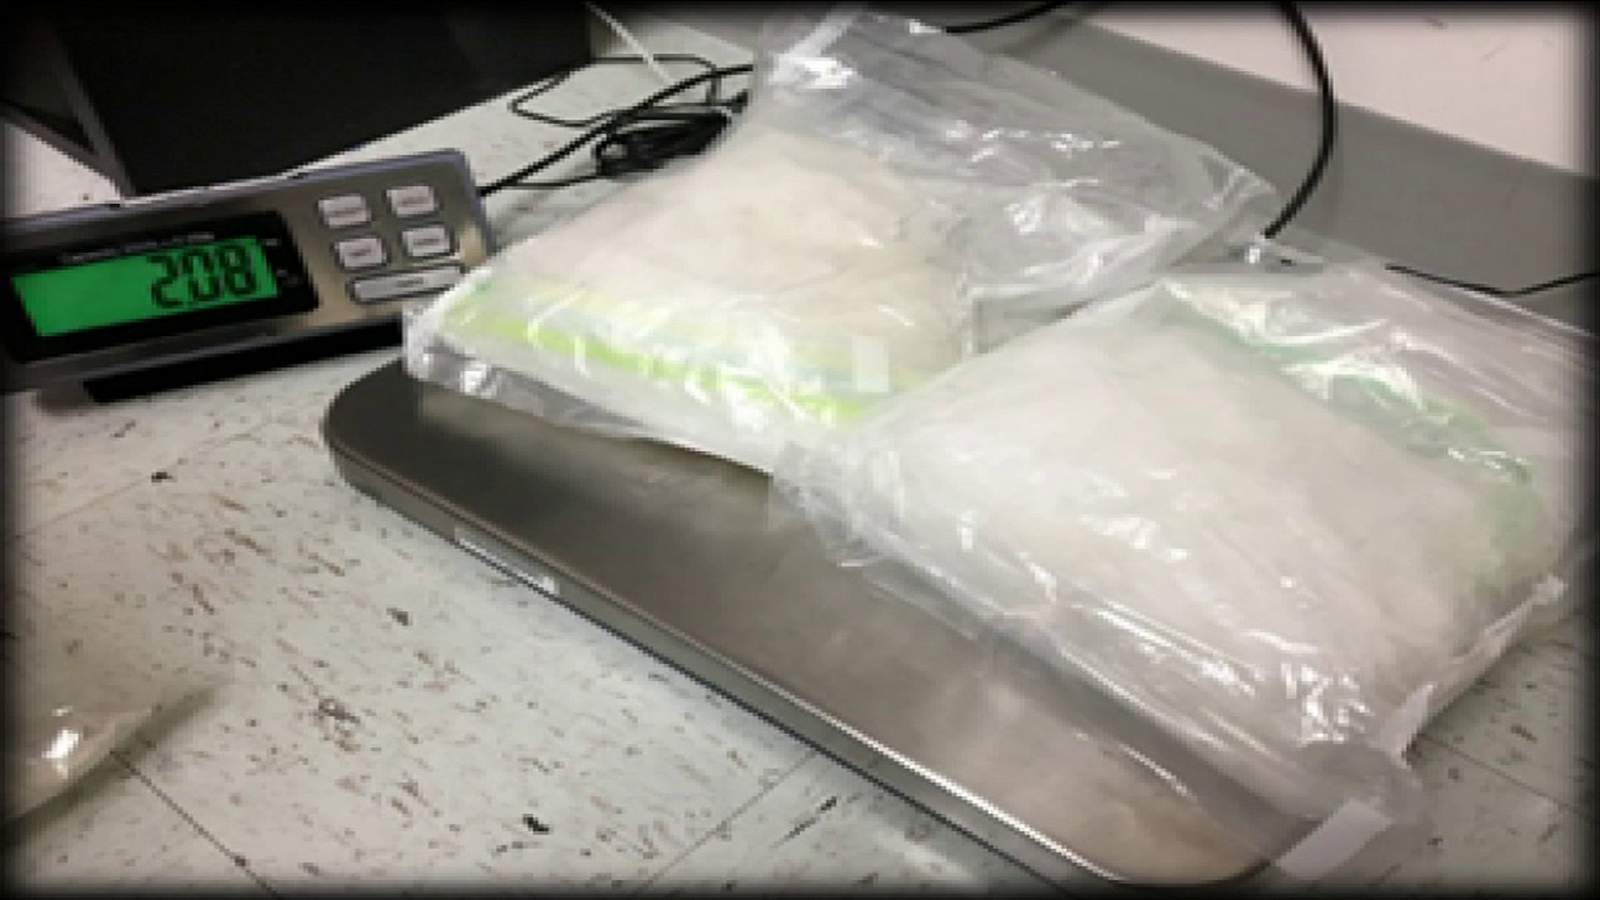 Meth trafficking, control an overwhelming problem, DEA says